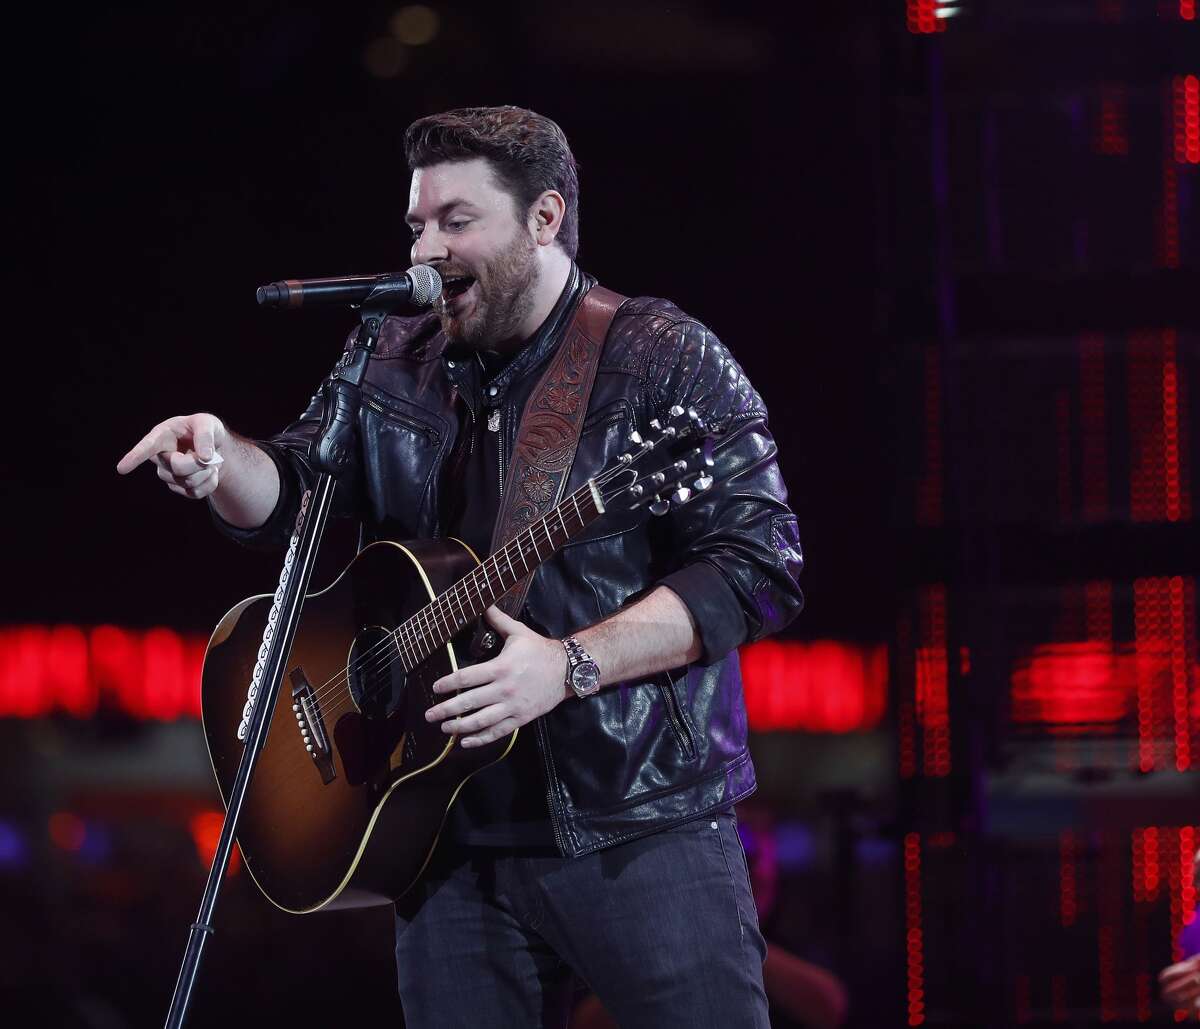 Chris Young performs in concert at the Houston Livestock Show and Rodeo at NRG Stadium, Wednesday, March 22, 2017, in Houston. ( Karen Warren / Houston Chronicle )